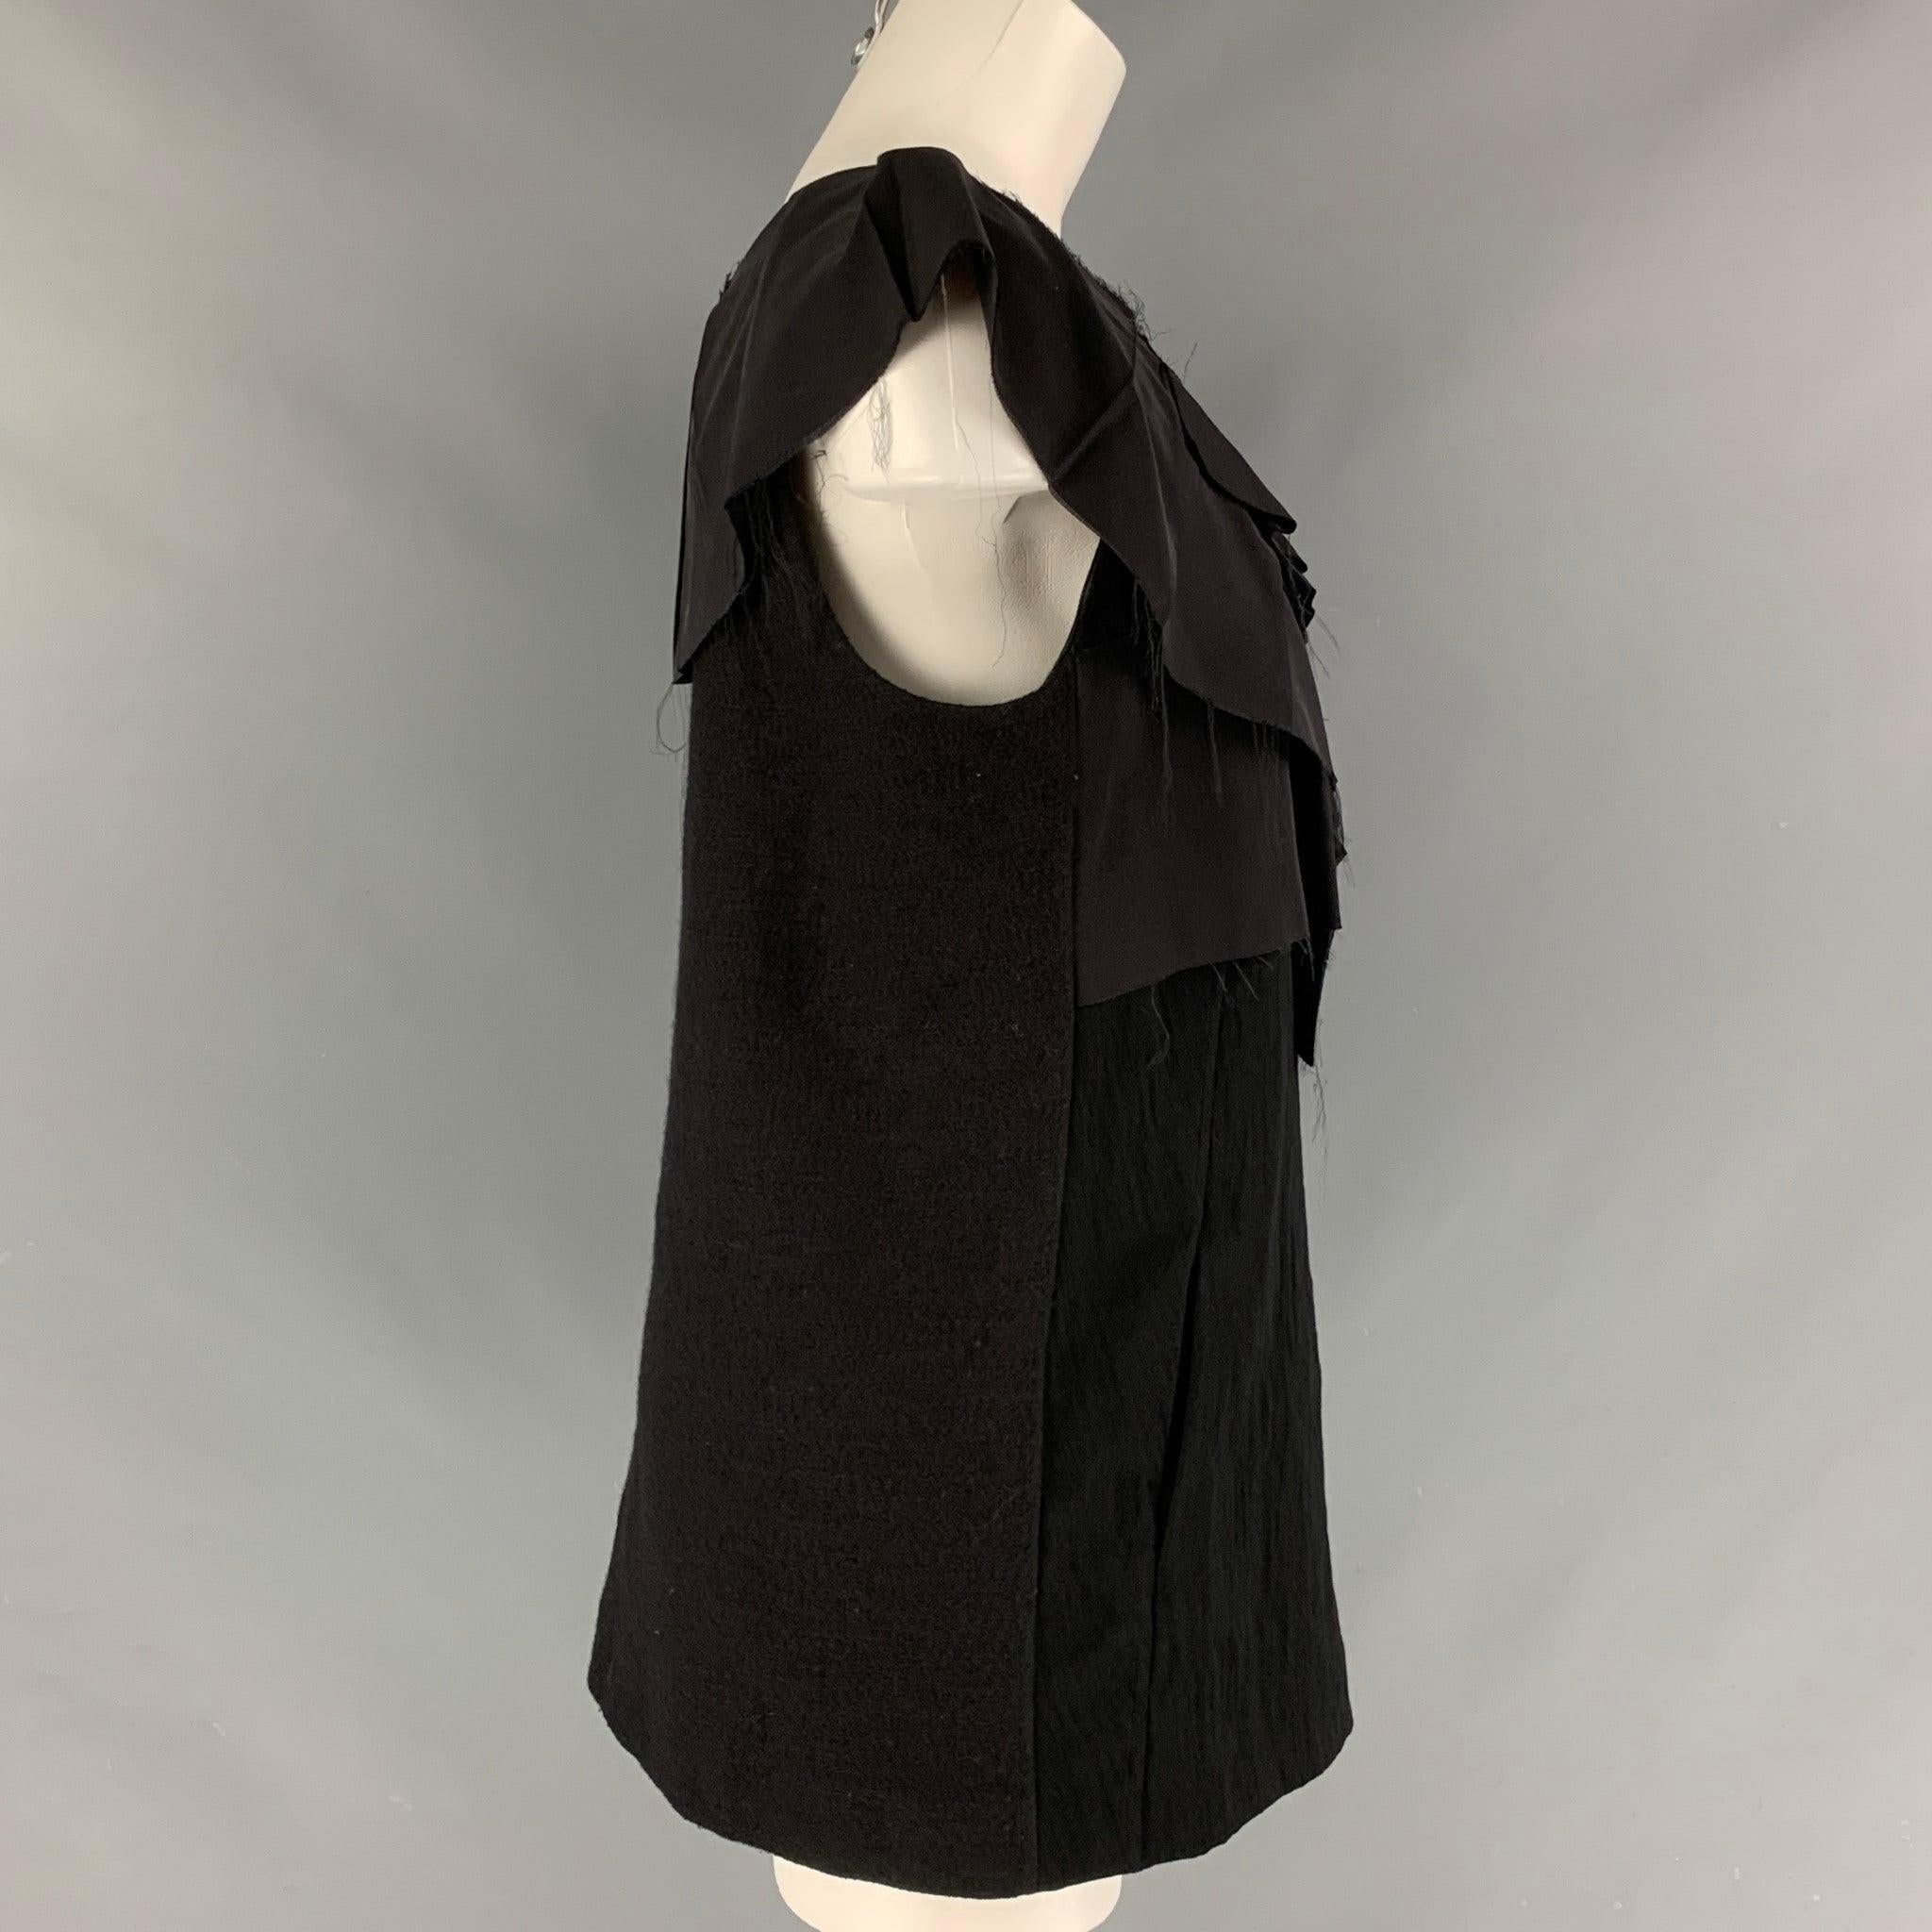 MARNI sleeveless v-neck blouse comes in a black wool and nylon featuring frontal pockets and ruffled detail at collar. Made in Italy.Excellent Pre-Owned Condition. 
 

 Marked:  44 
 

 Measurements: 
  
 Shoulder: 15 inches Bust: 38 inches Length: